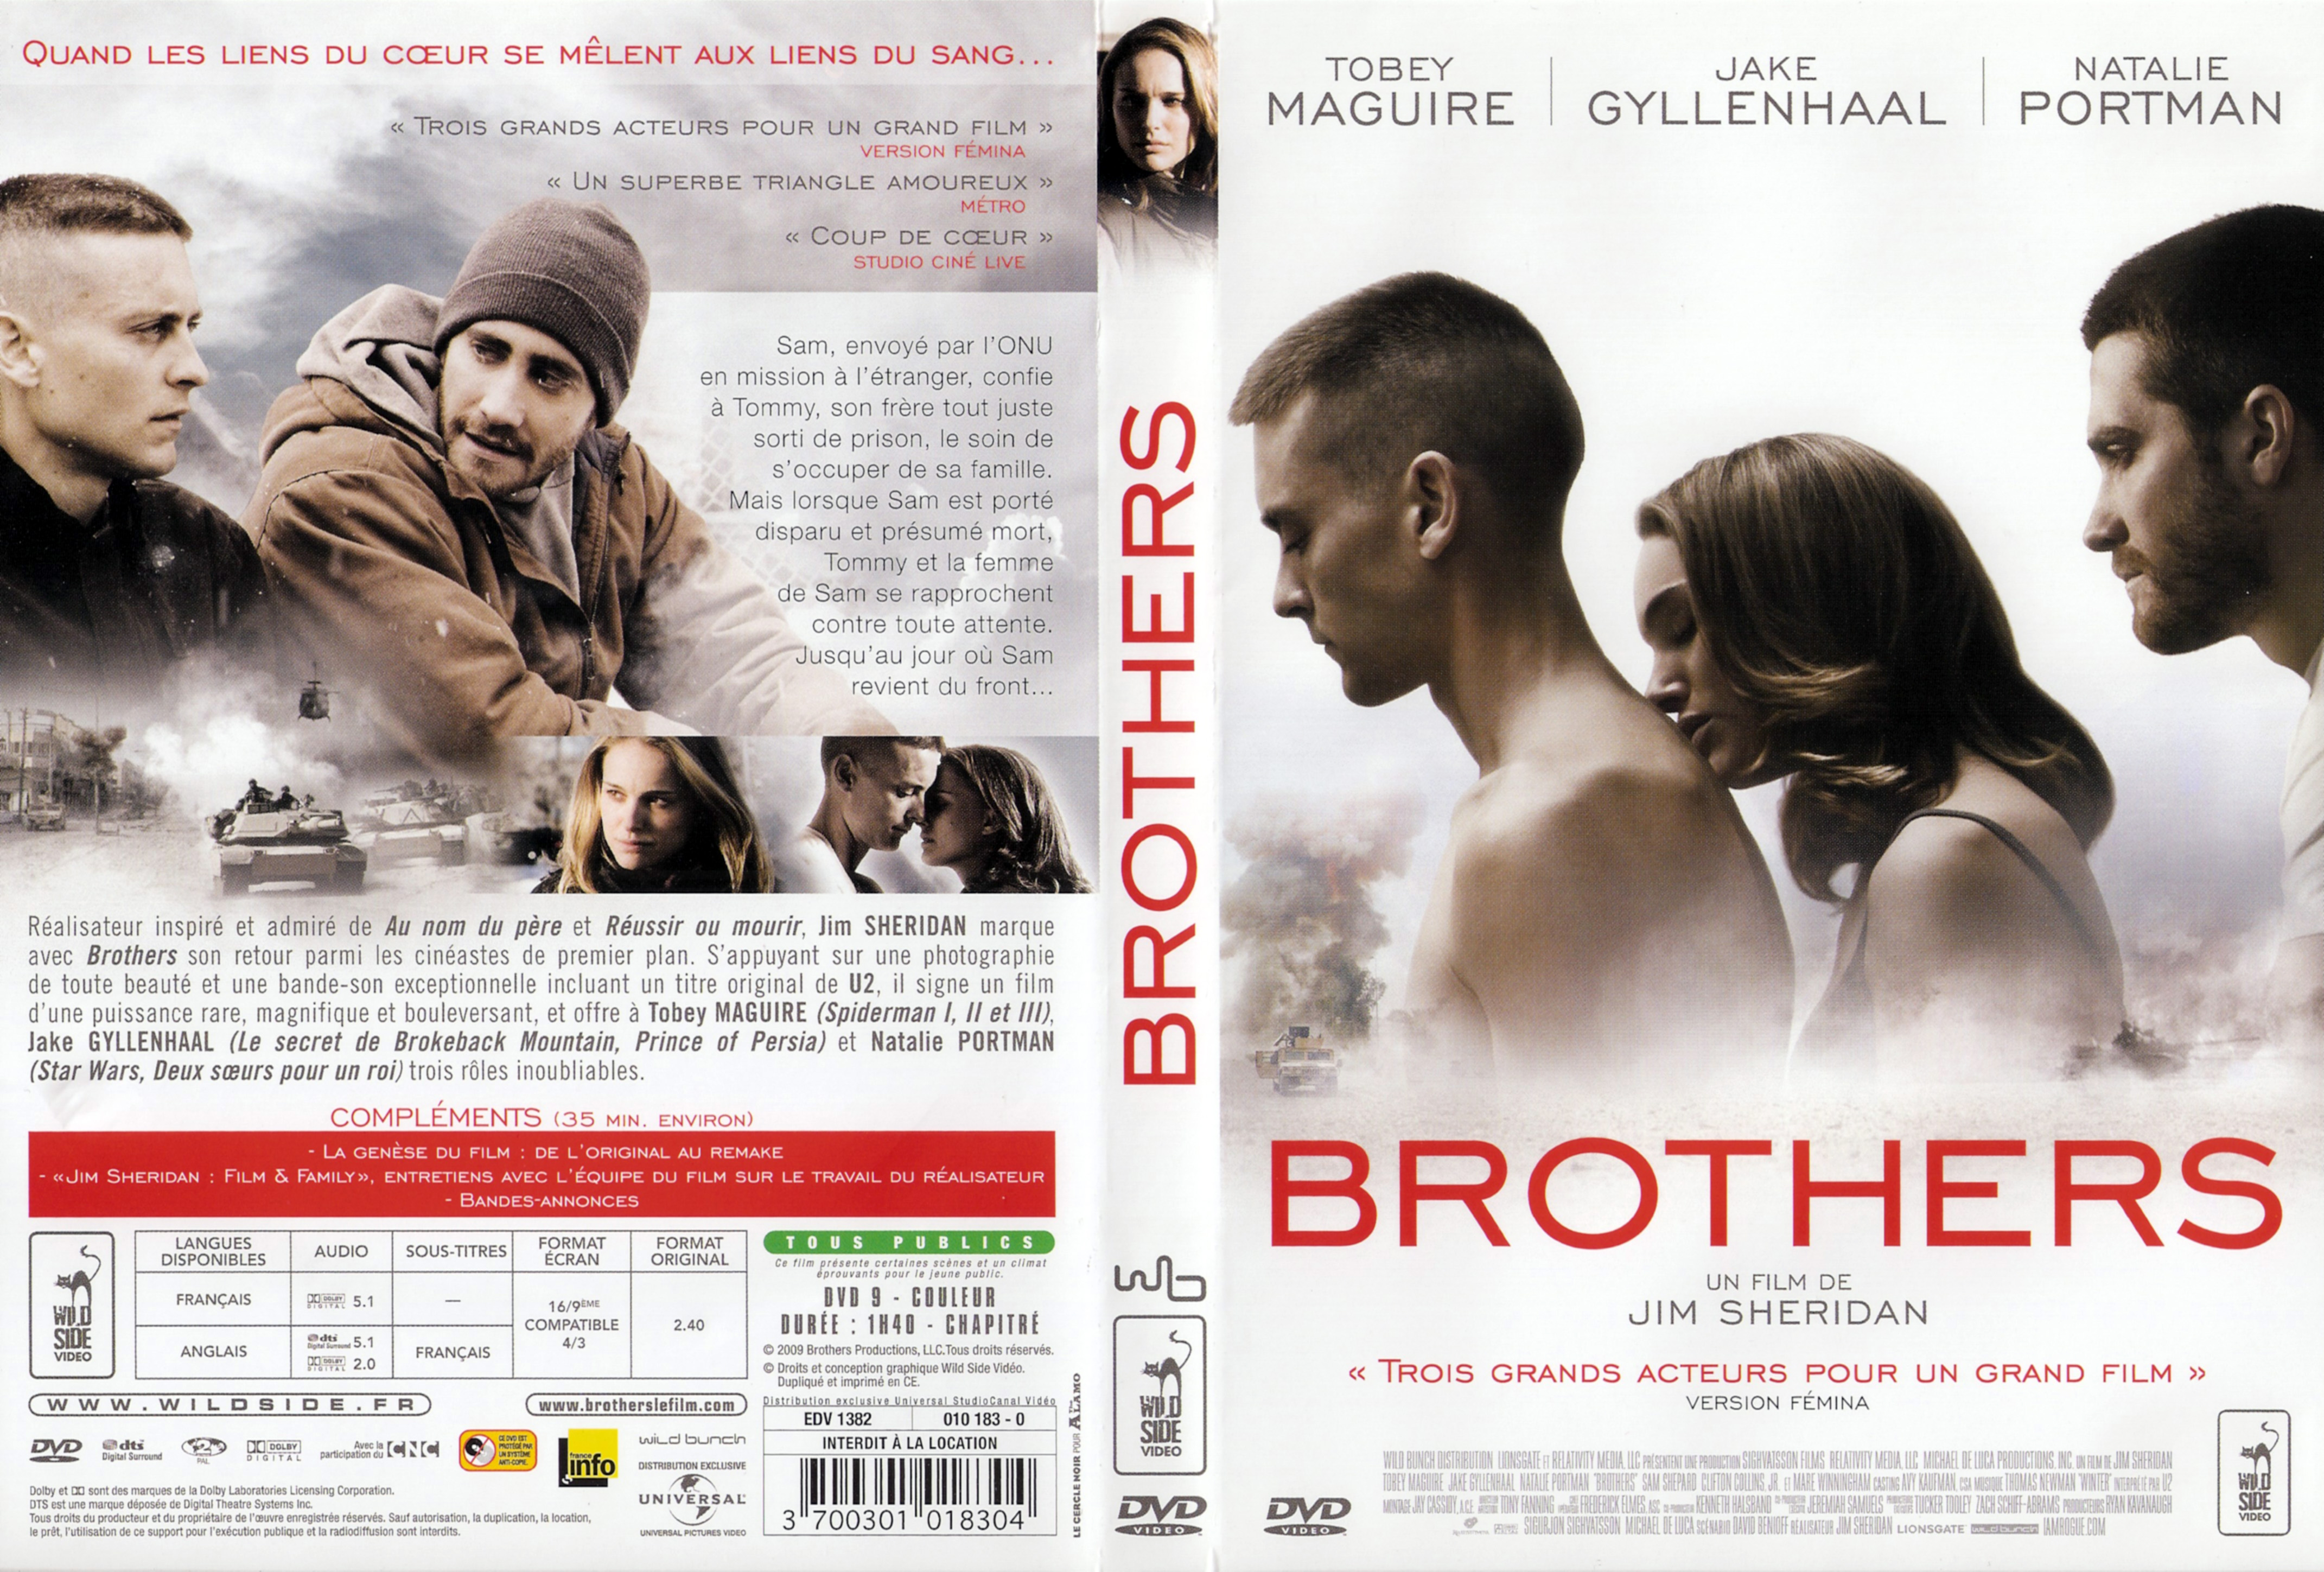 Jaquette DVD Brothers